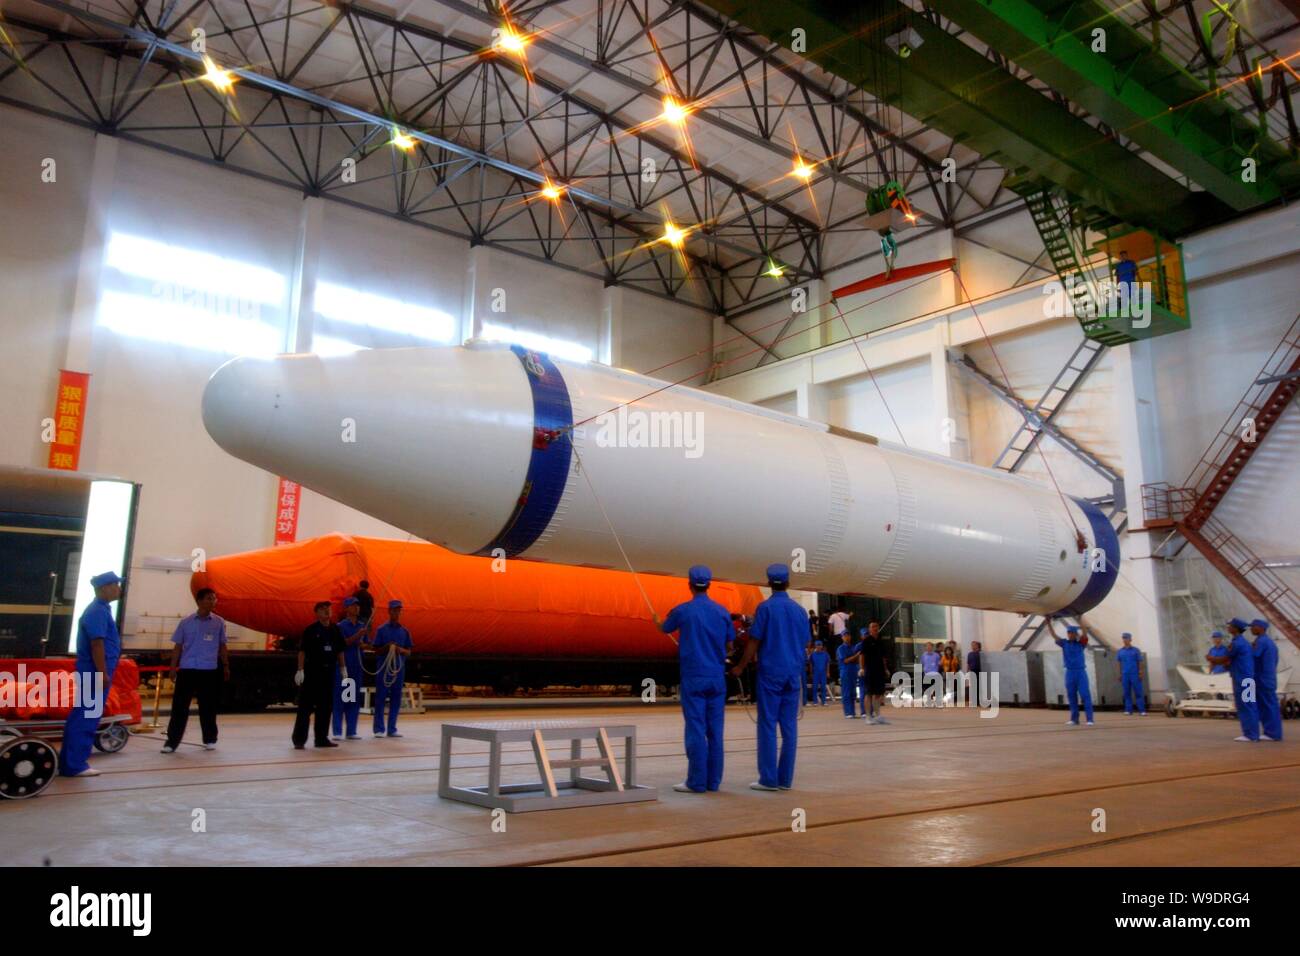 Chinese aeronautical scientists unload a rocket booster of a Long March 2F (CZ-2F) rocket during the preparation for the Shenzhou VII manned spaceflig Stock Photo